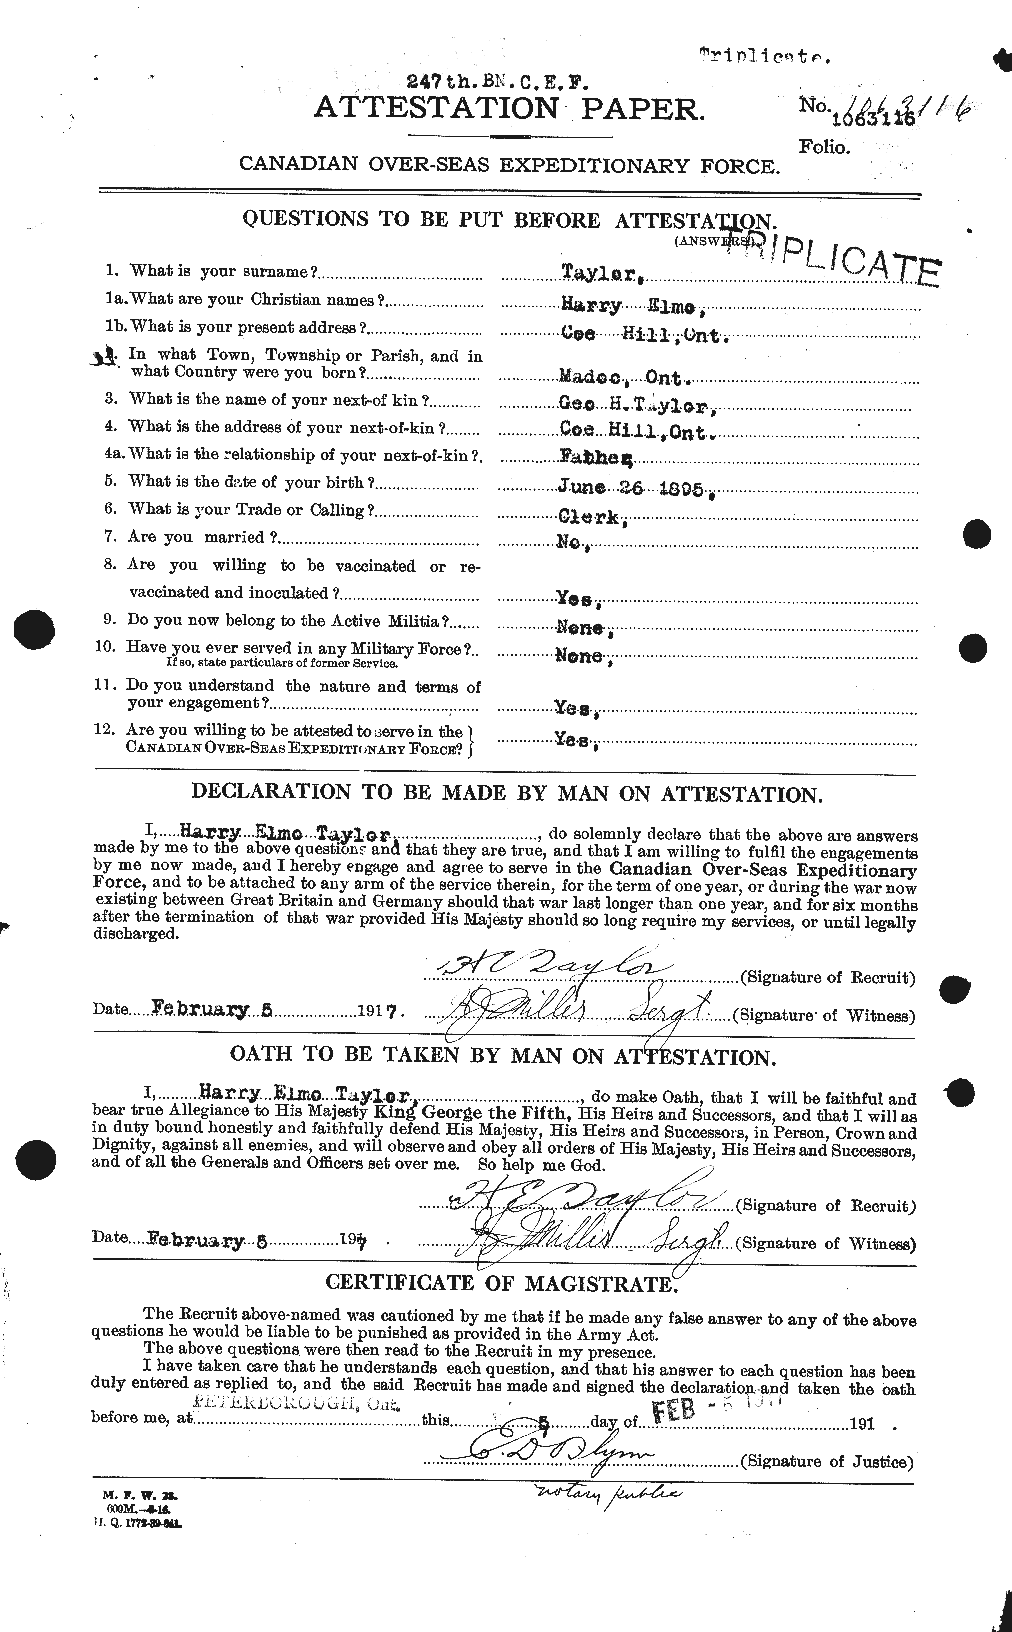 Personnel Records of the First World War - CEF 626493a